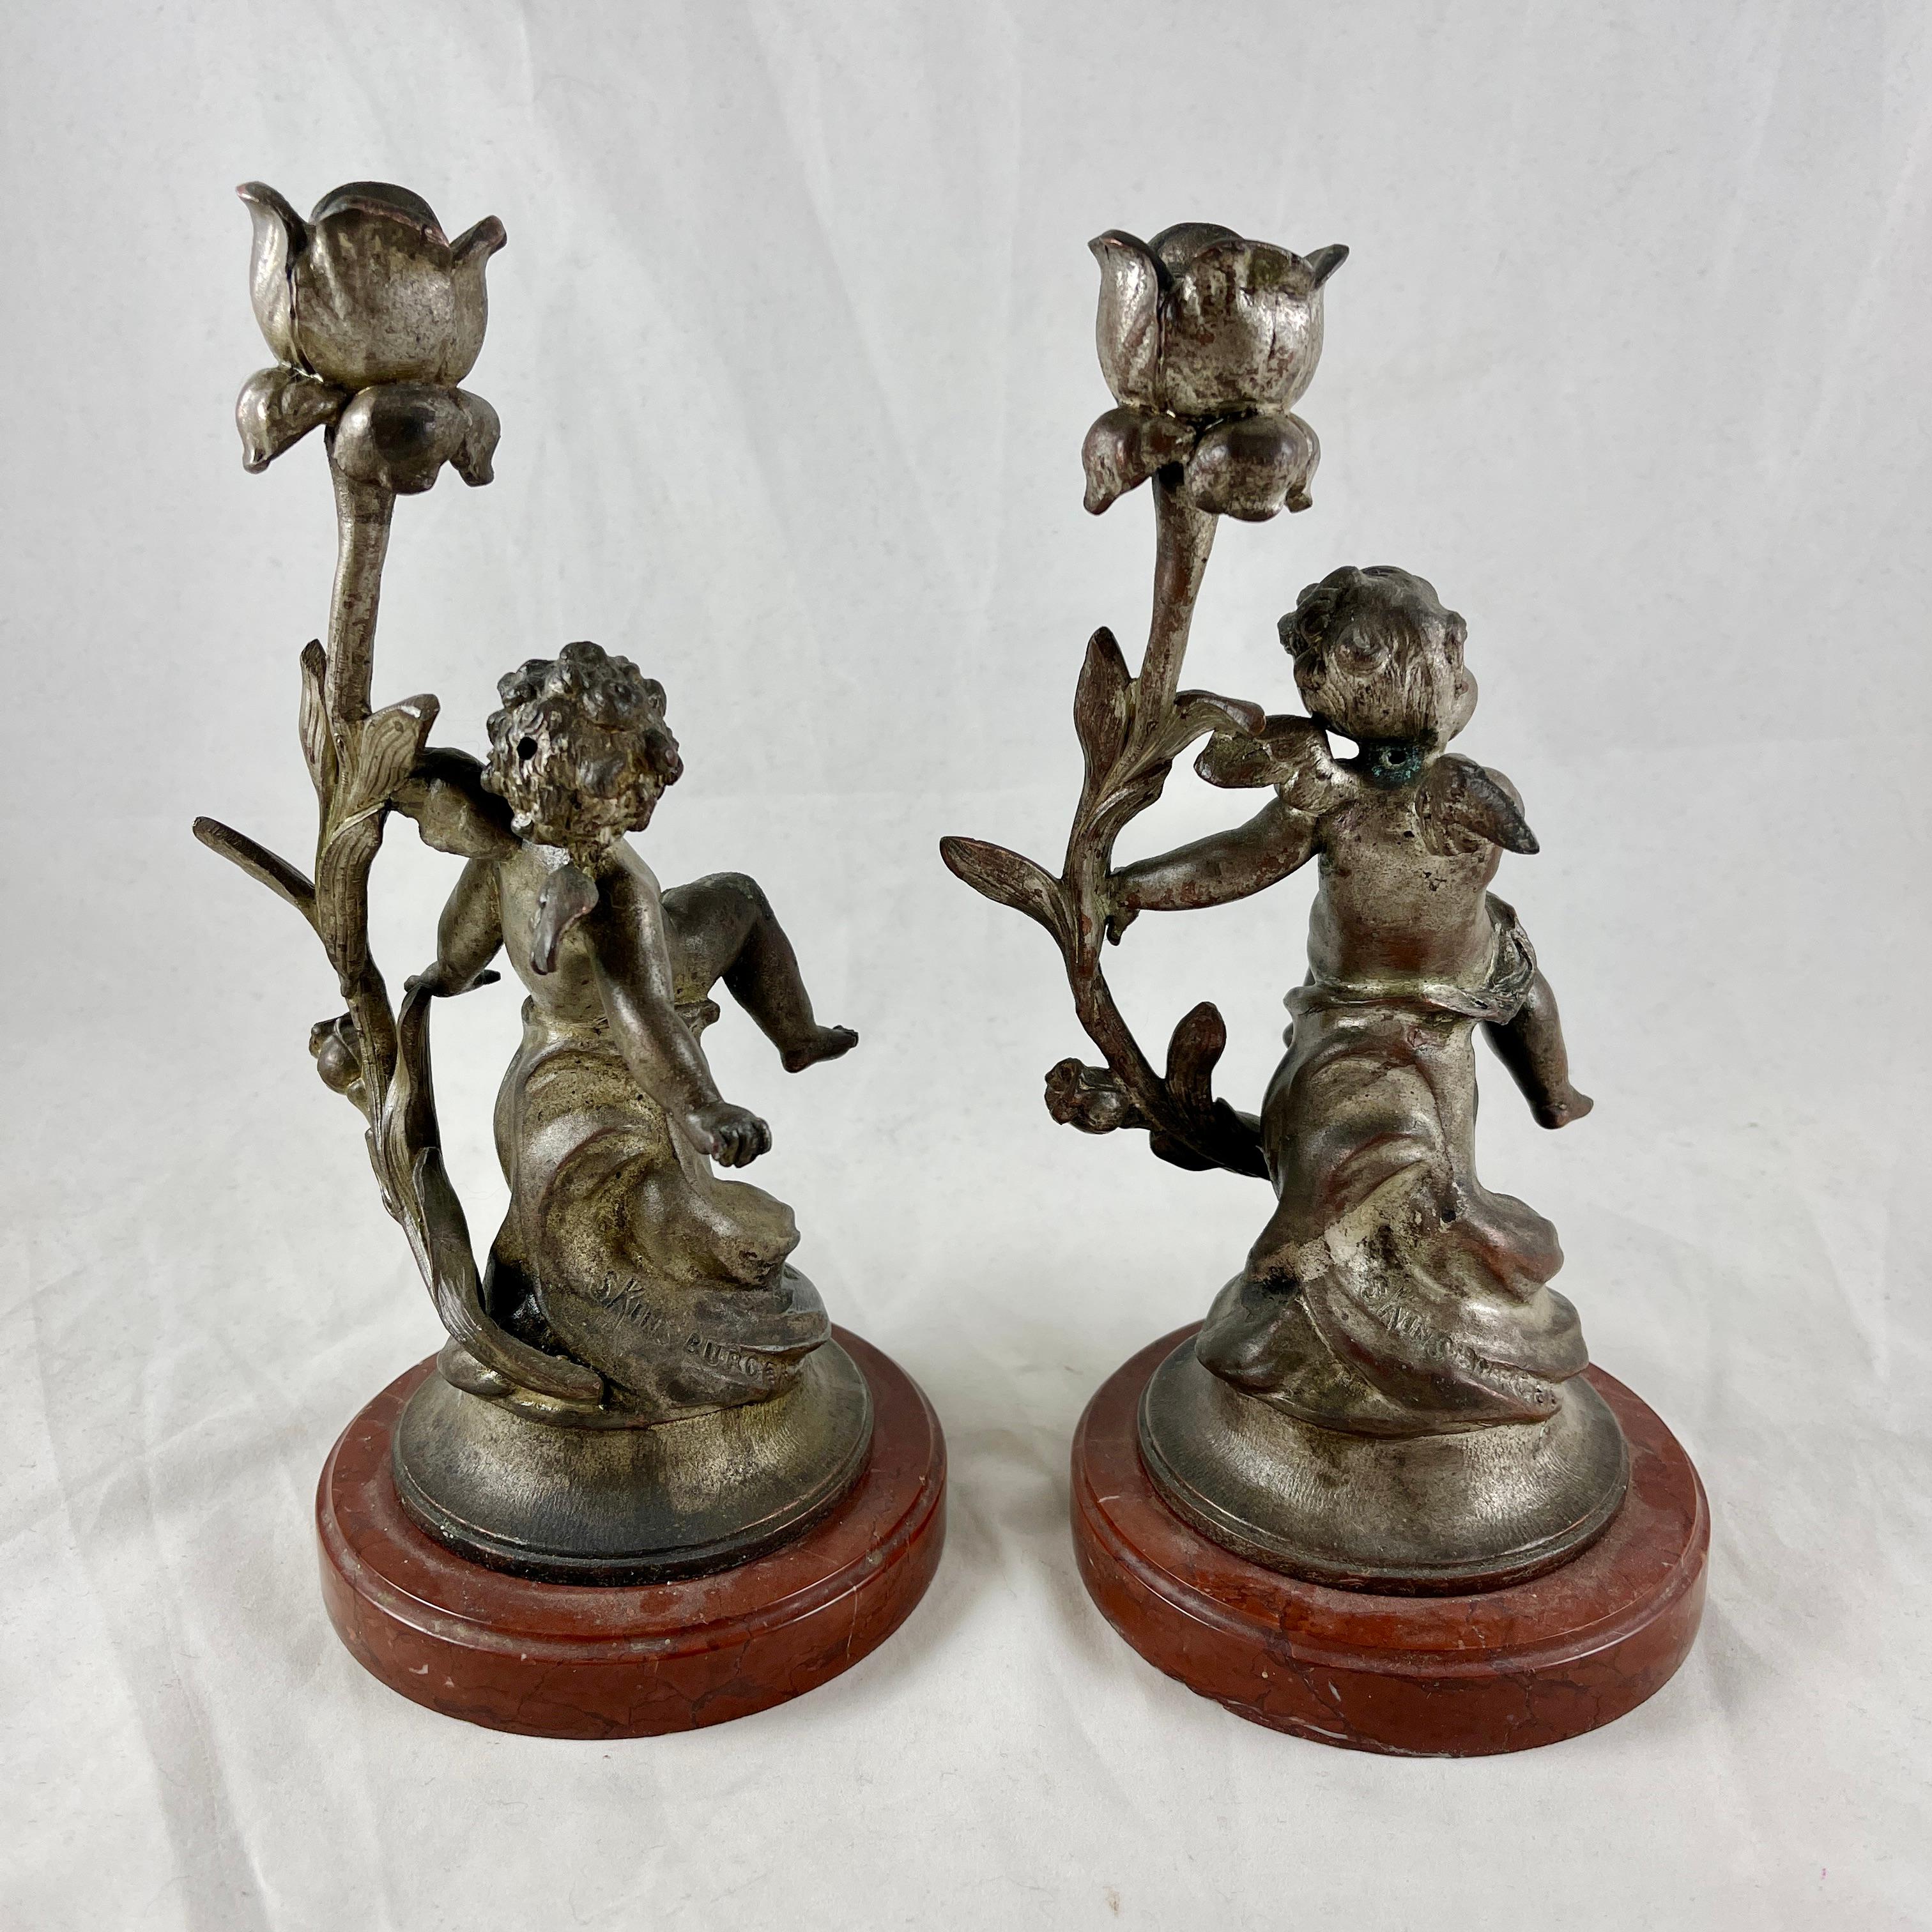 French Putti Cherub Candlesticks Signed Sylvain Kinsburger Spelter & Marble S/2 For Sale 1